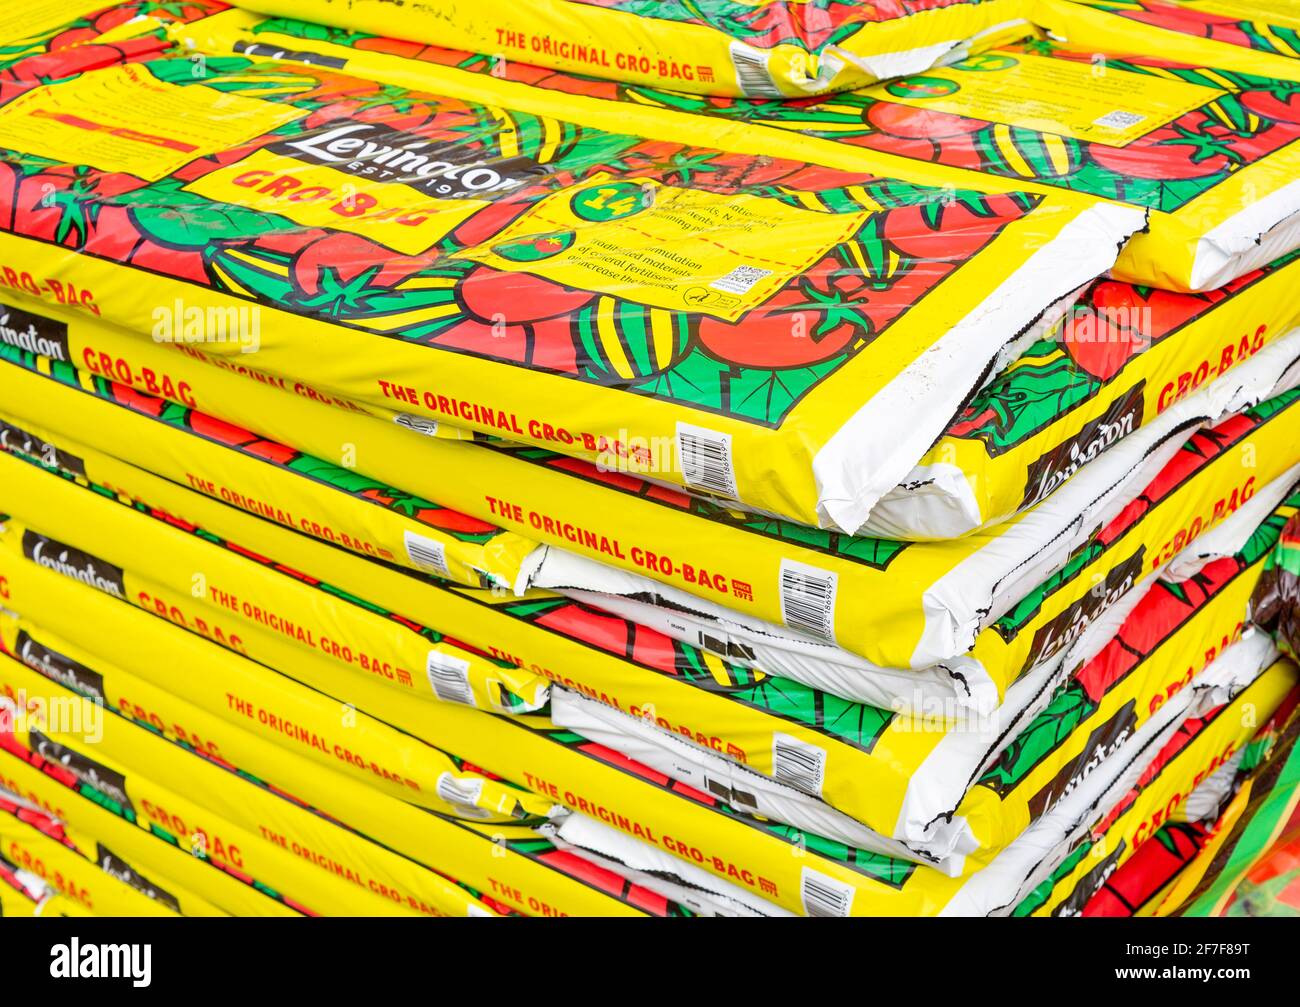 Bags of Levington Gro-Bag  tomato planters grow bags stacked up, UK Stock Photo